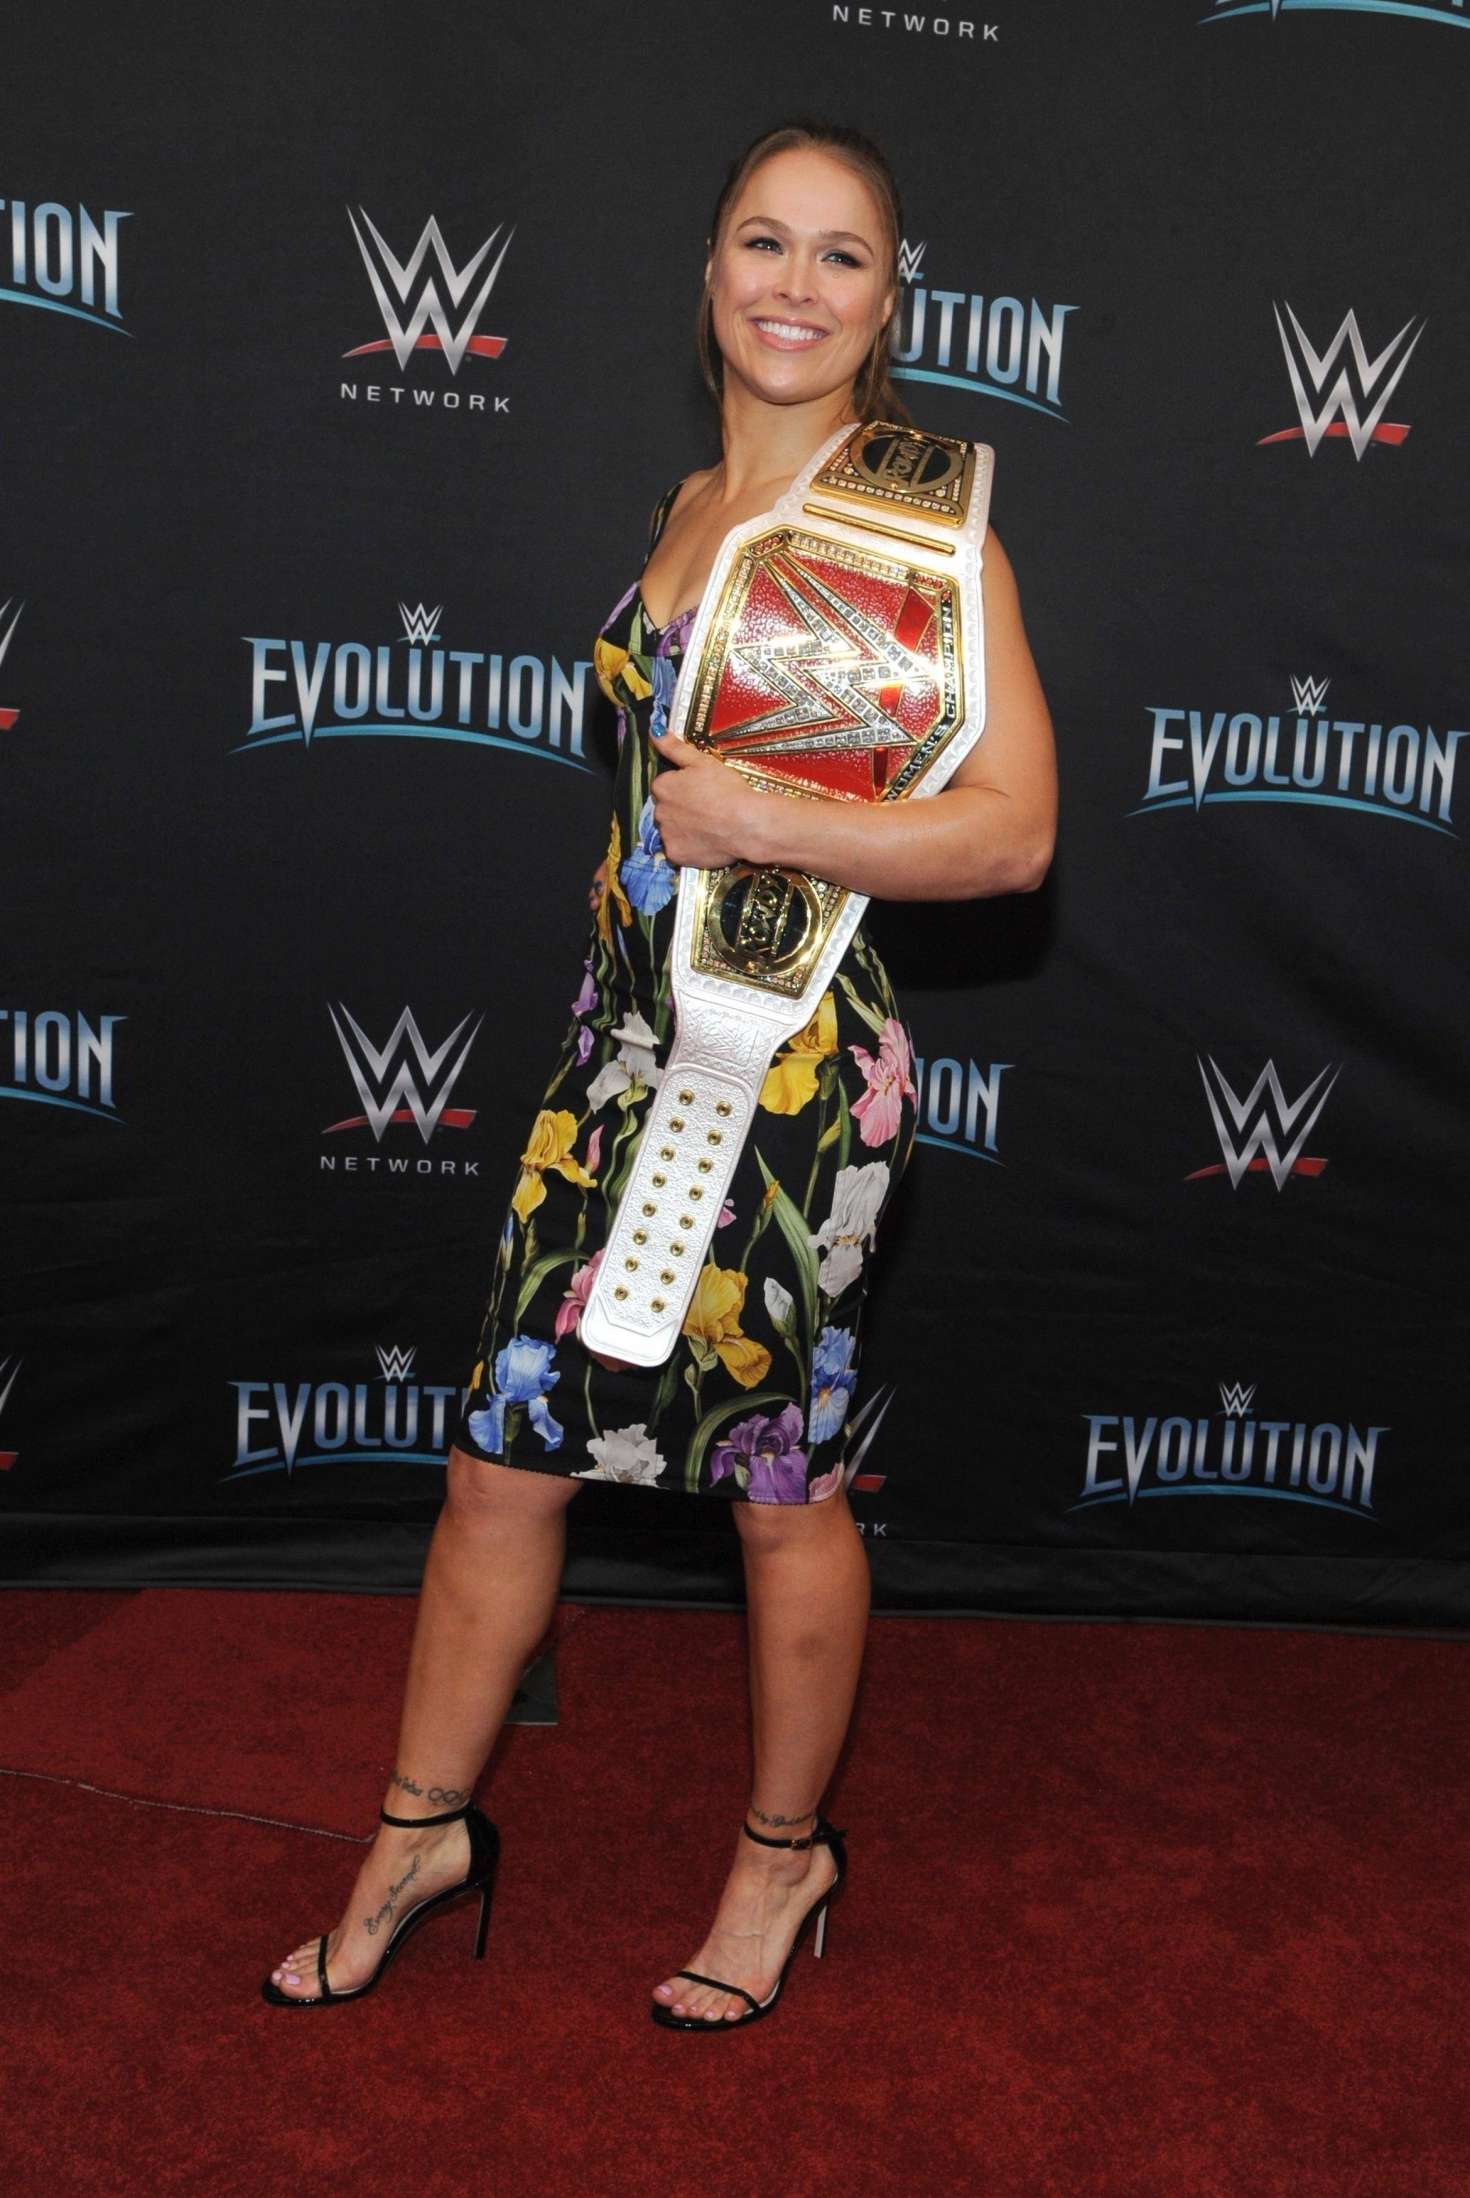 Ronda Rousey â€“ WWEâ€™s First Ever all-womenâ€™s event â€˜Evolutionâ€™ in Uniondale